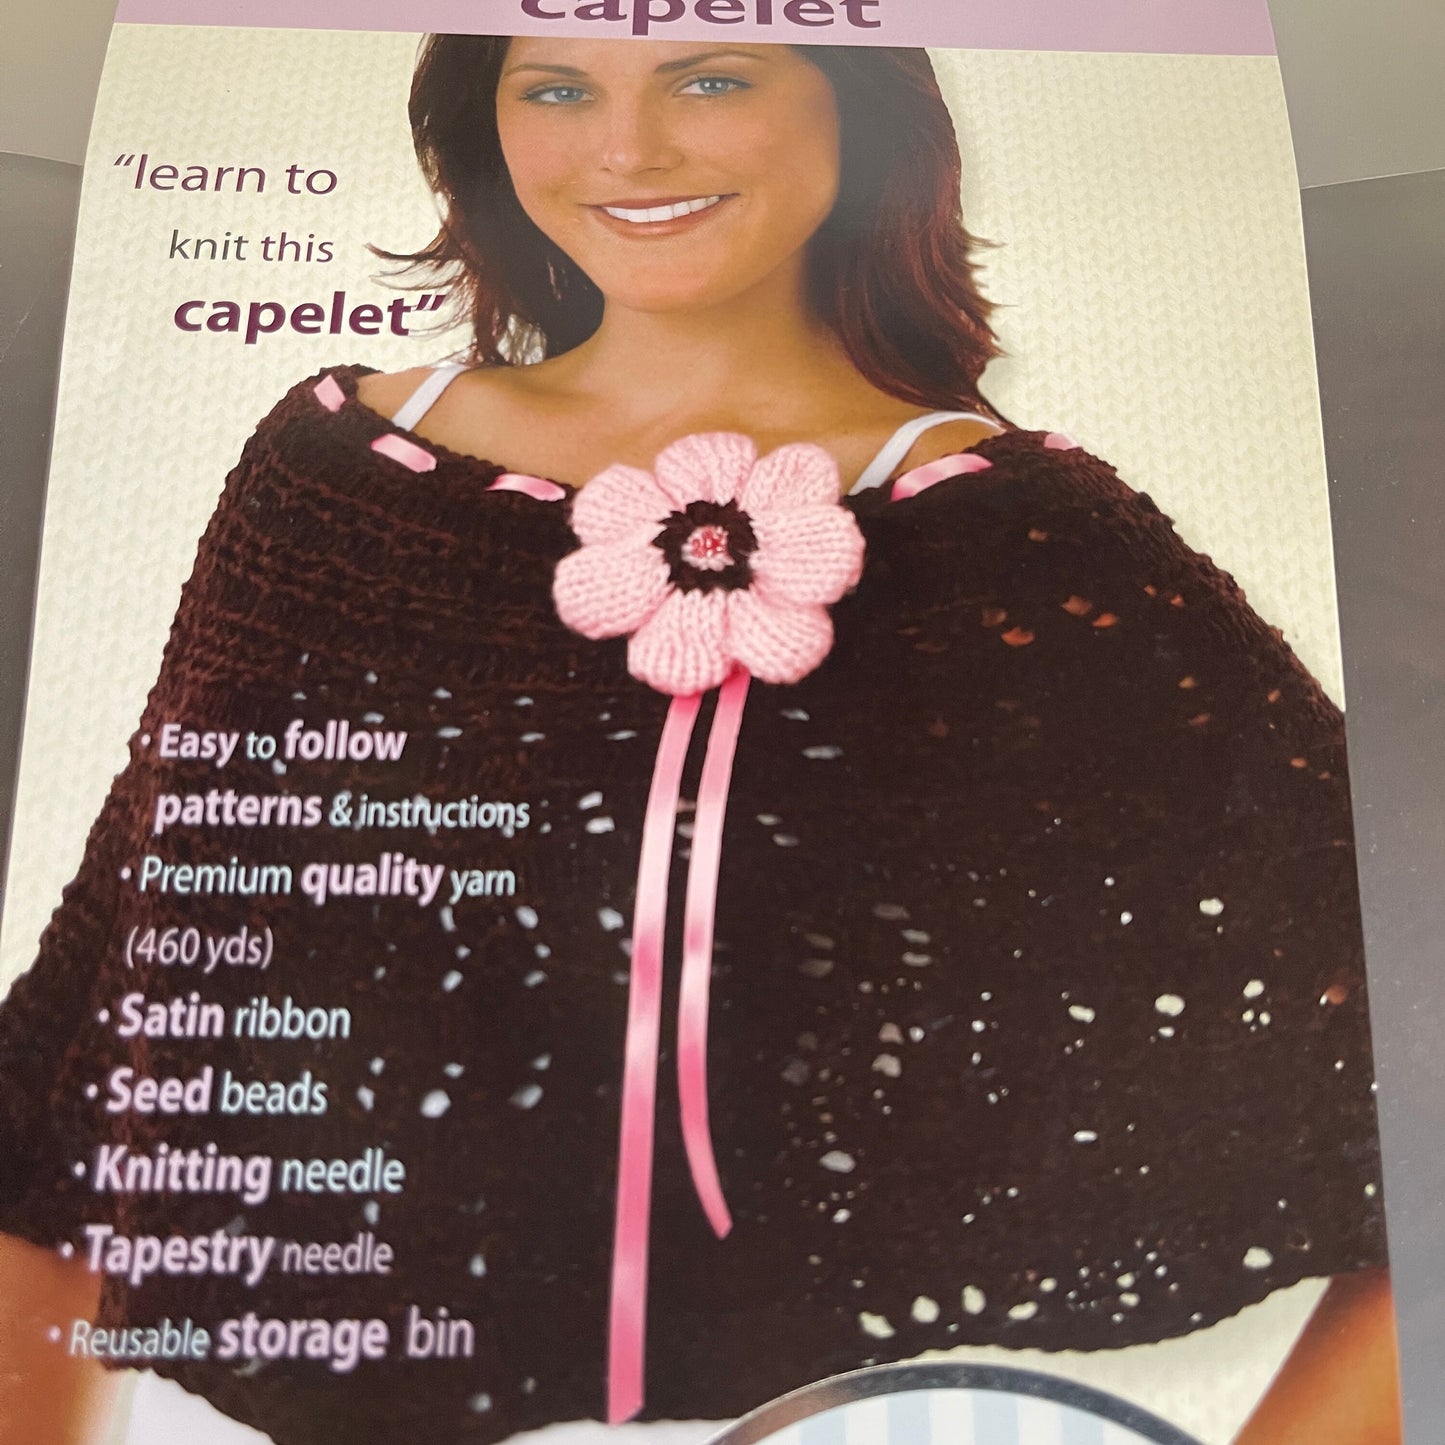 knit this capelet everything you need to knit learn to knit this capelet Includes 460 Yards of Yarn Needles Ribbon and Beads